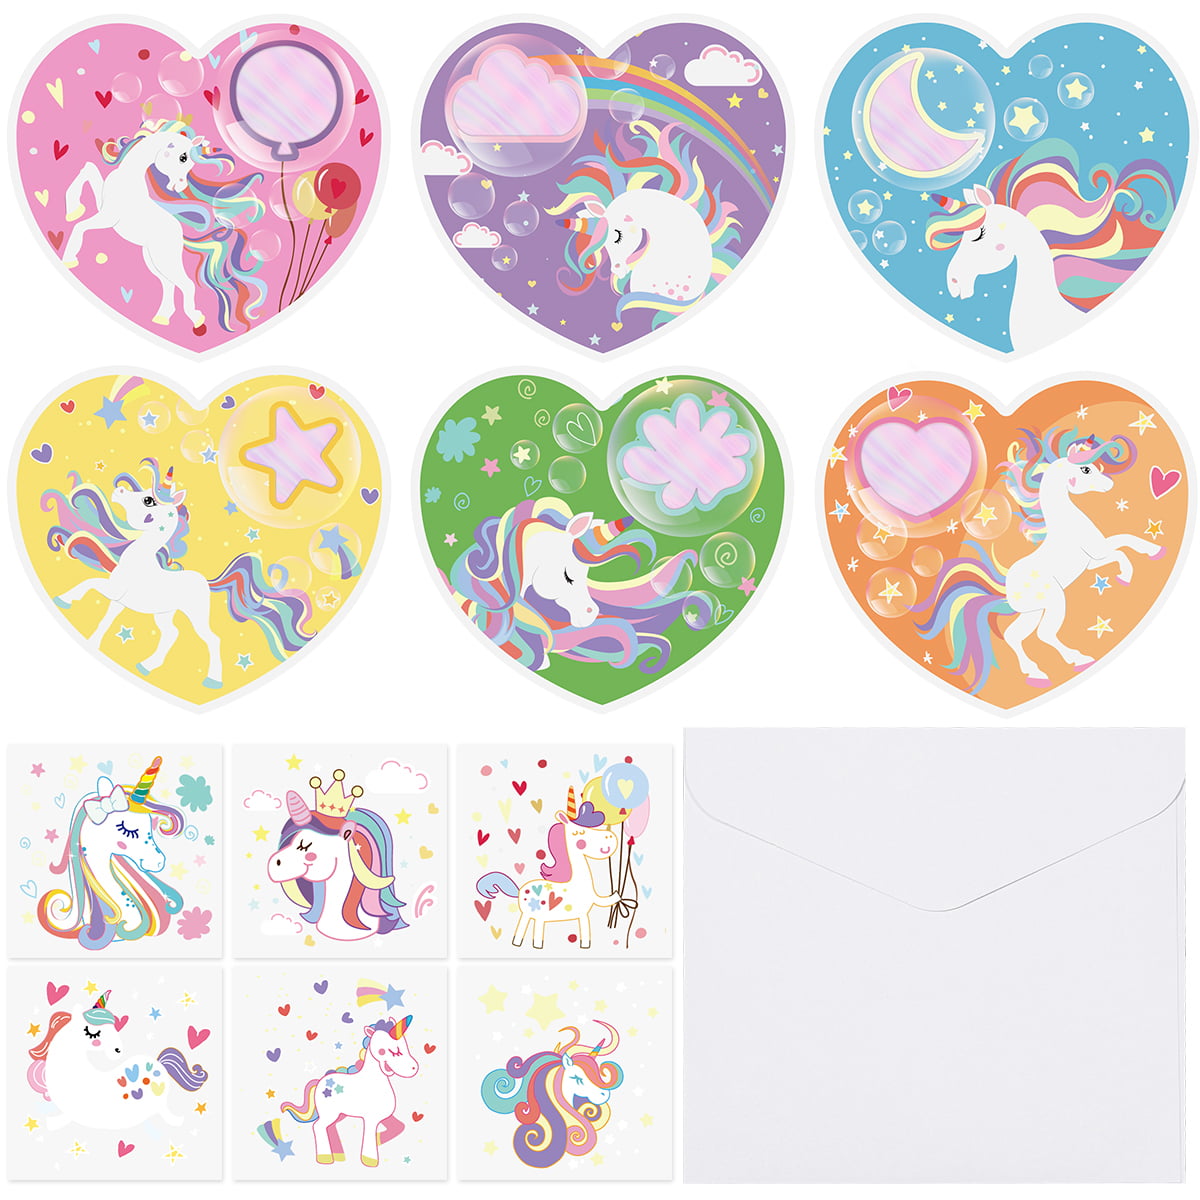 Envelopes Included Unomor Valentines Day Cards for Kids 36pcs Valentine Greeting Cards with 6 Patterns Valentine Unicorn Stickers for Children Party Favors 